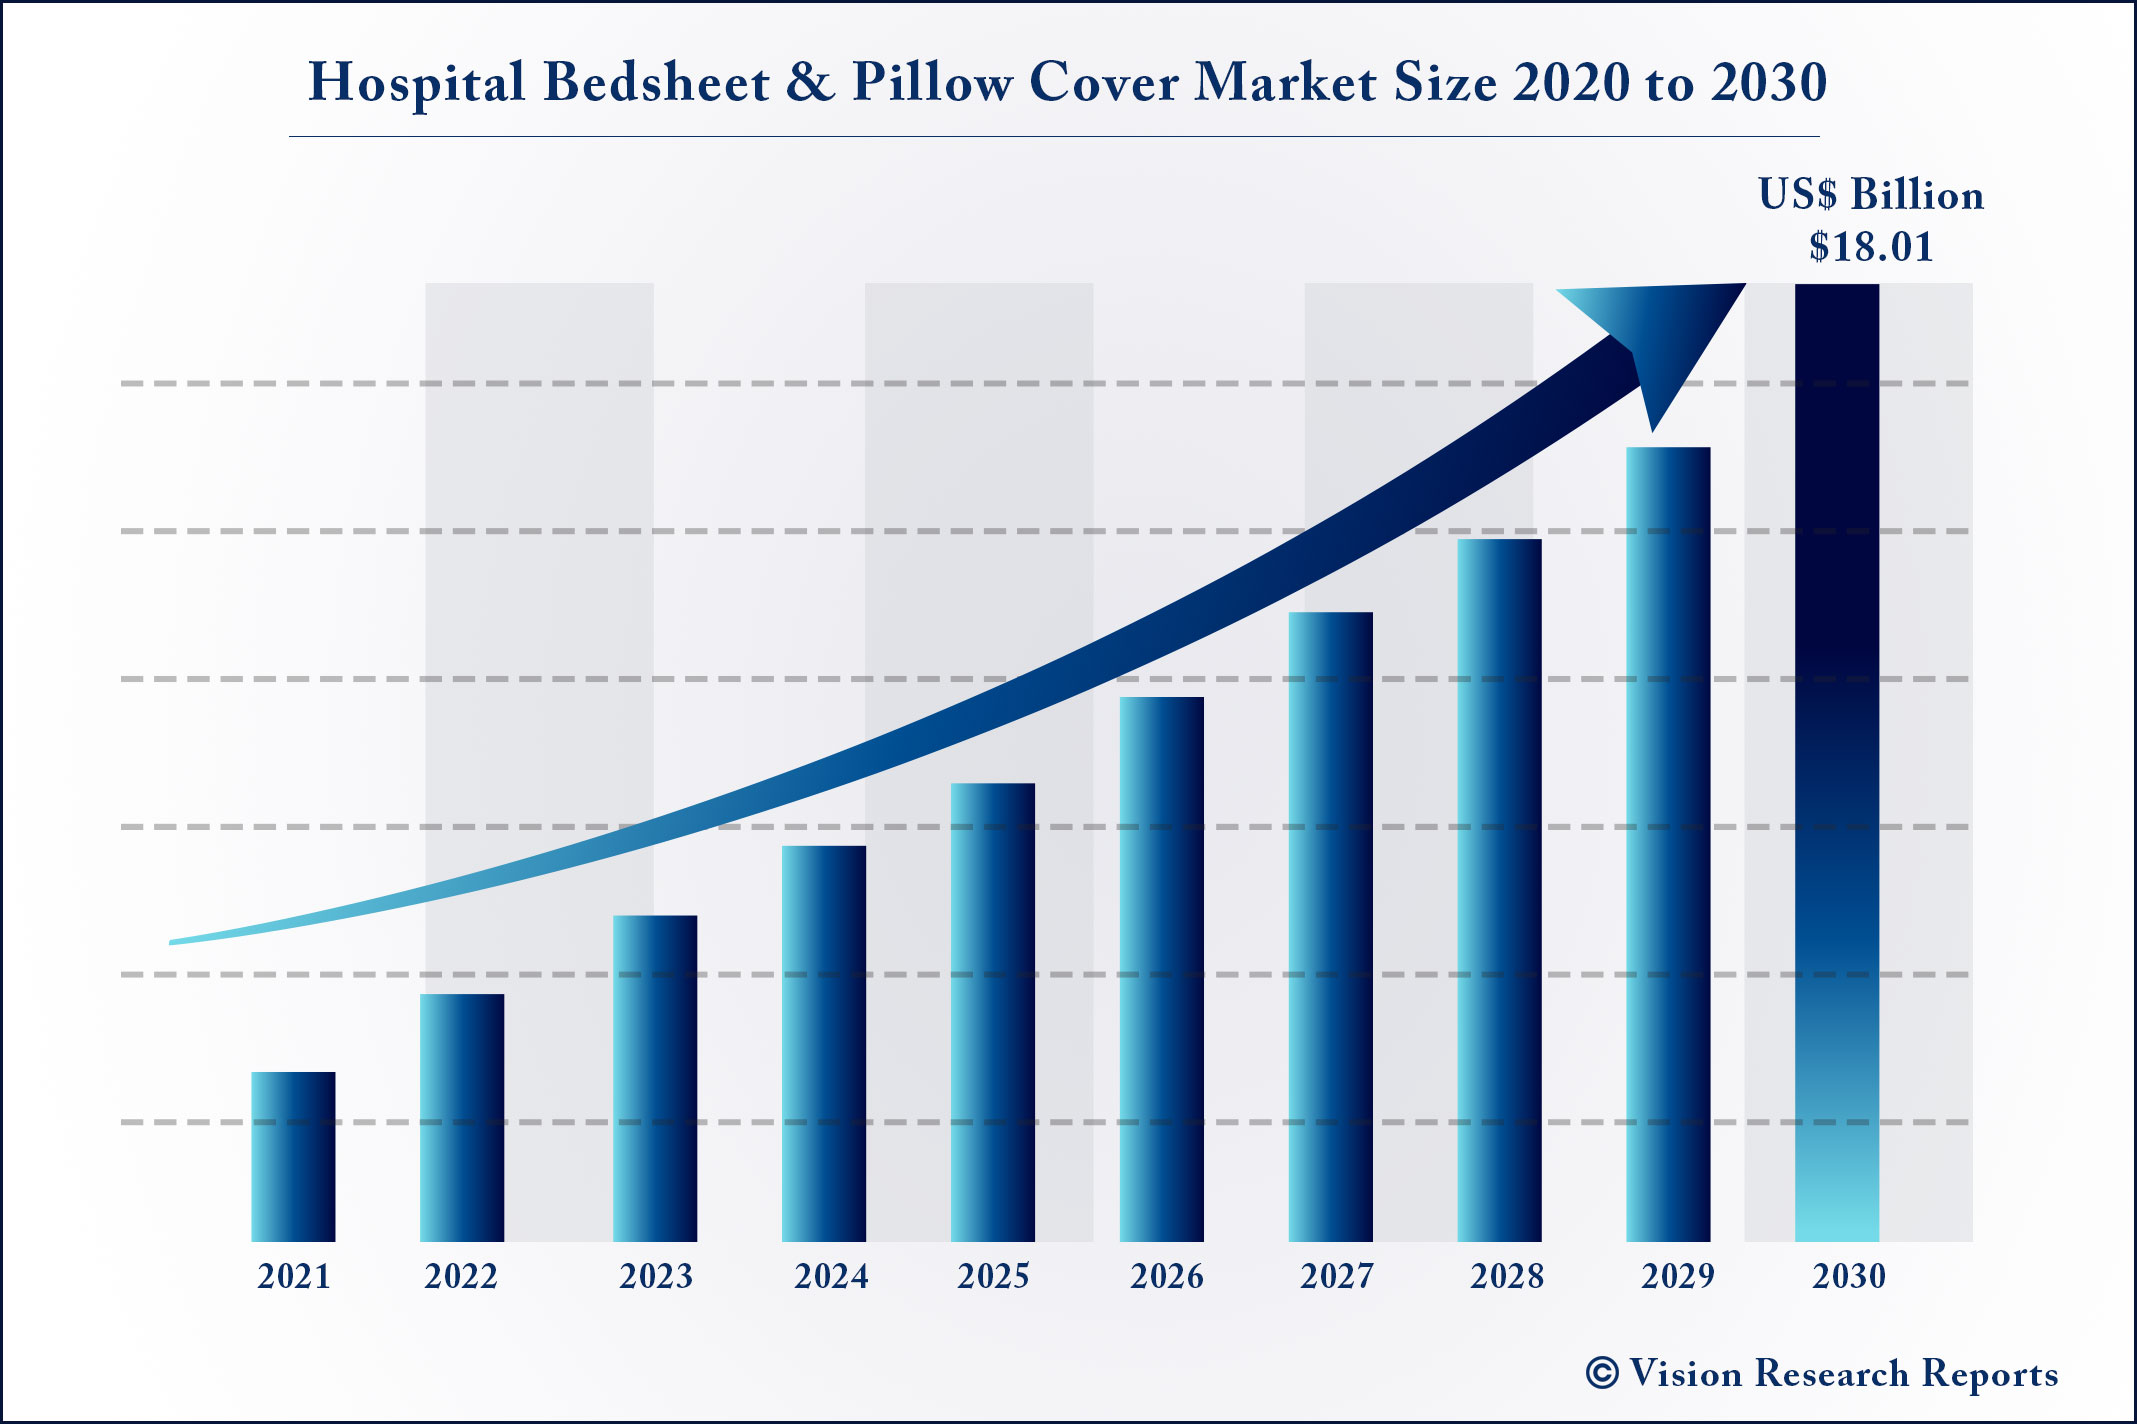 Hospital Bedsheet & Pillow Cover Market Size 2020 to 2030